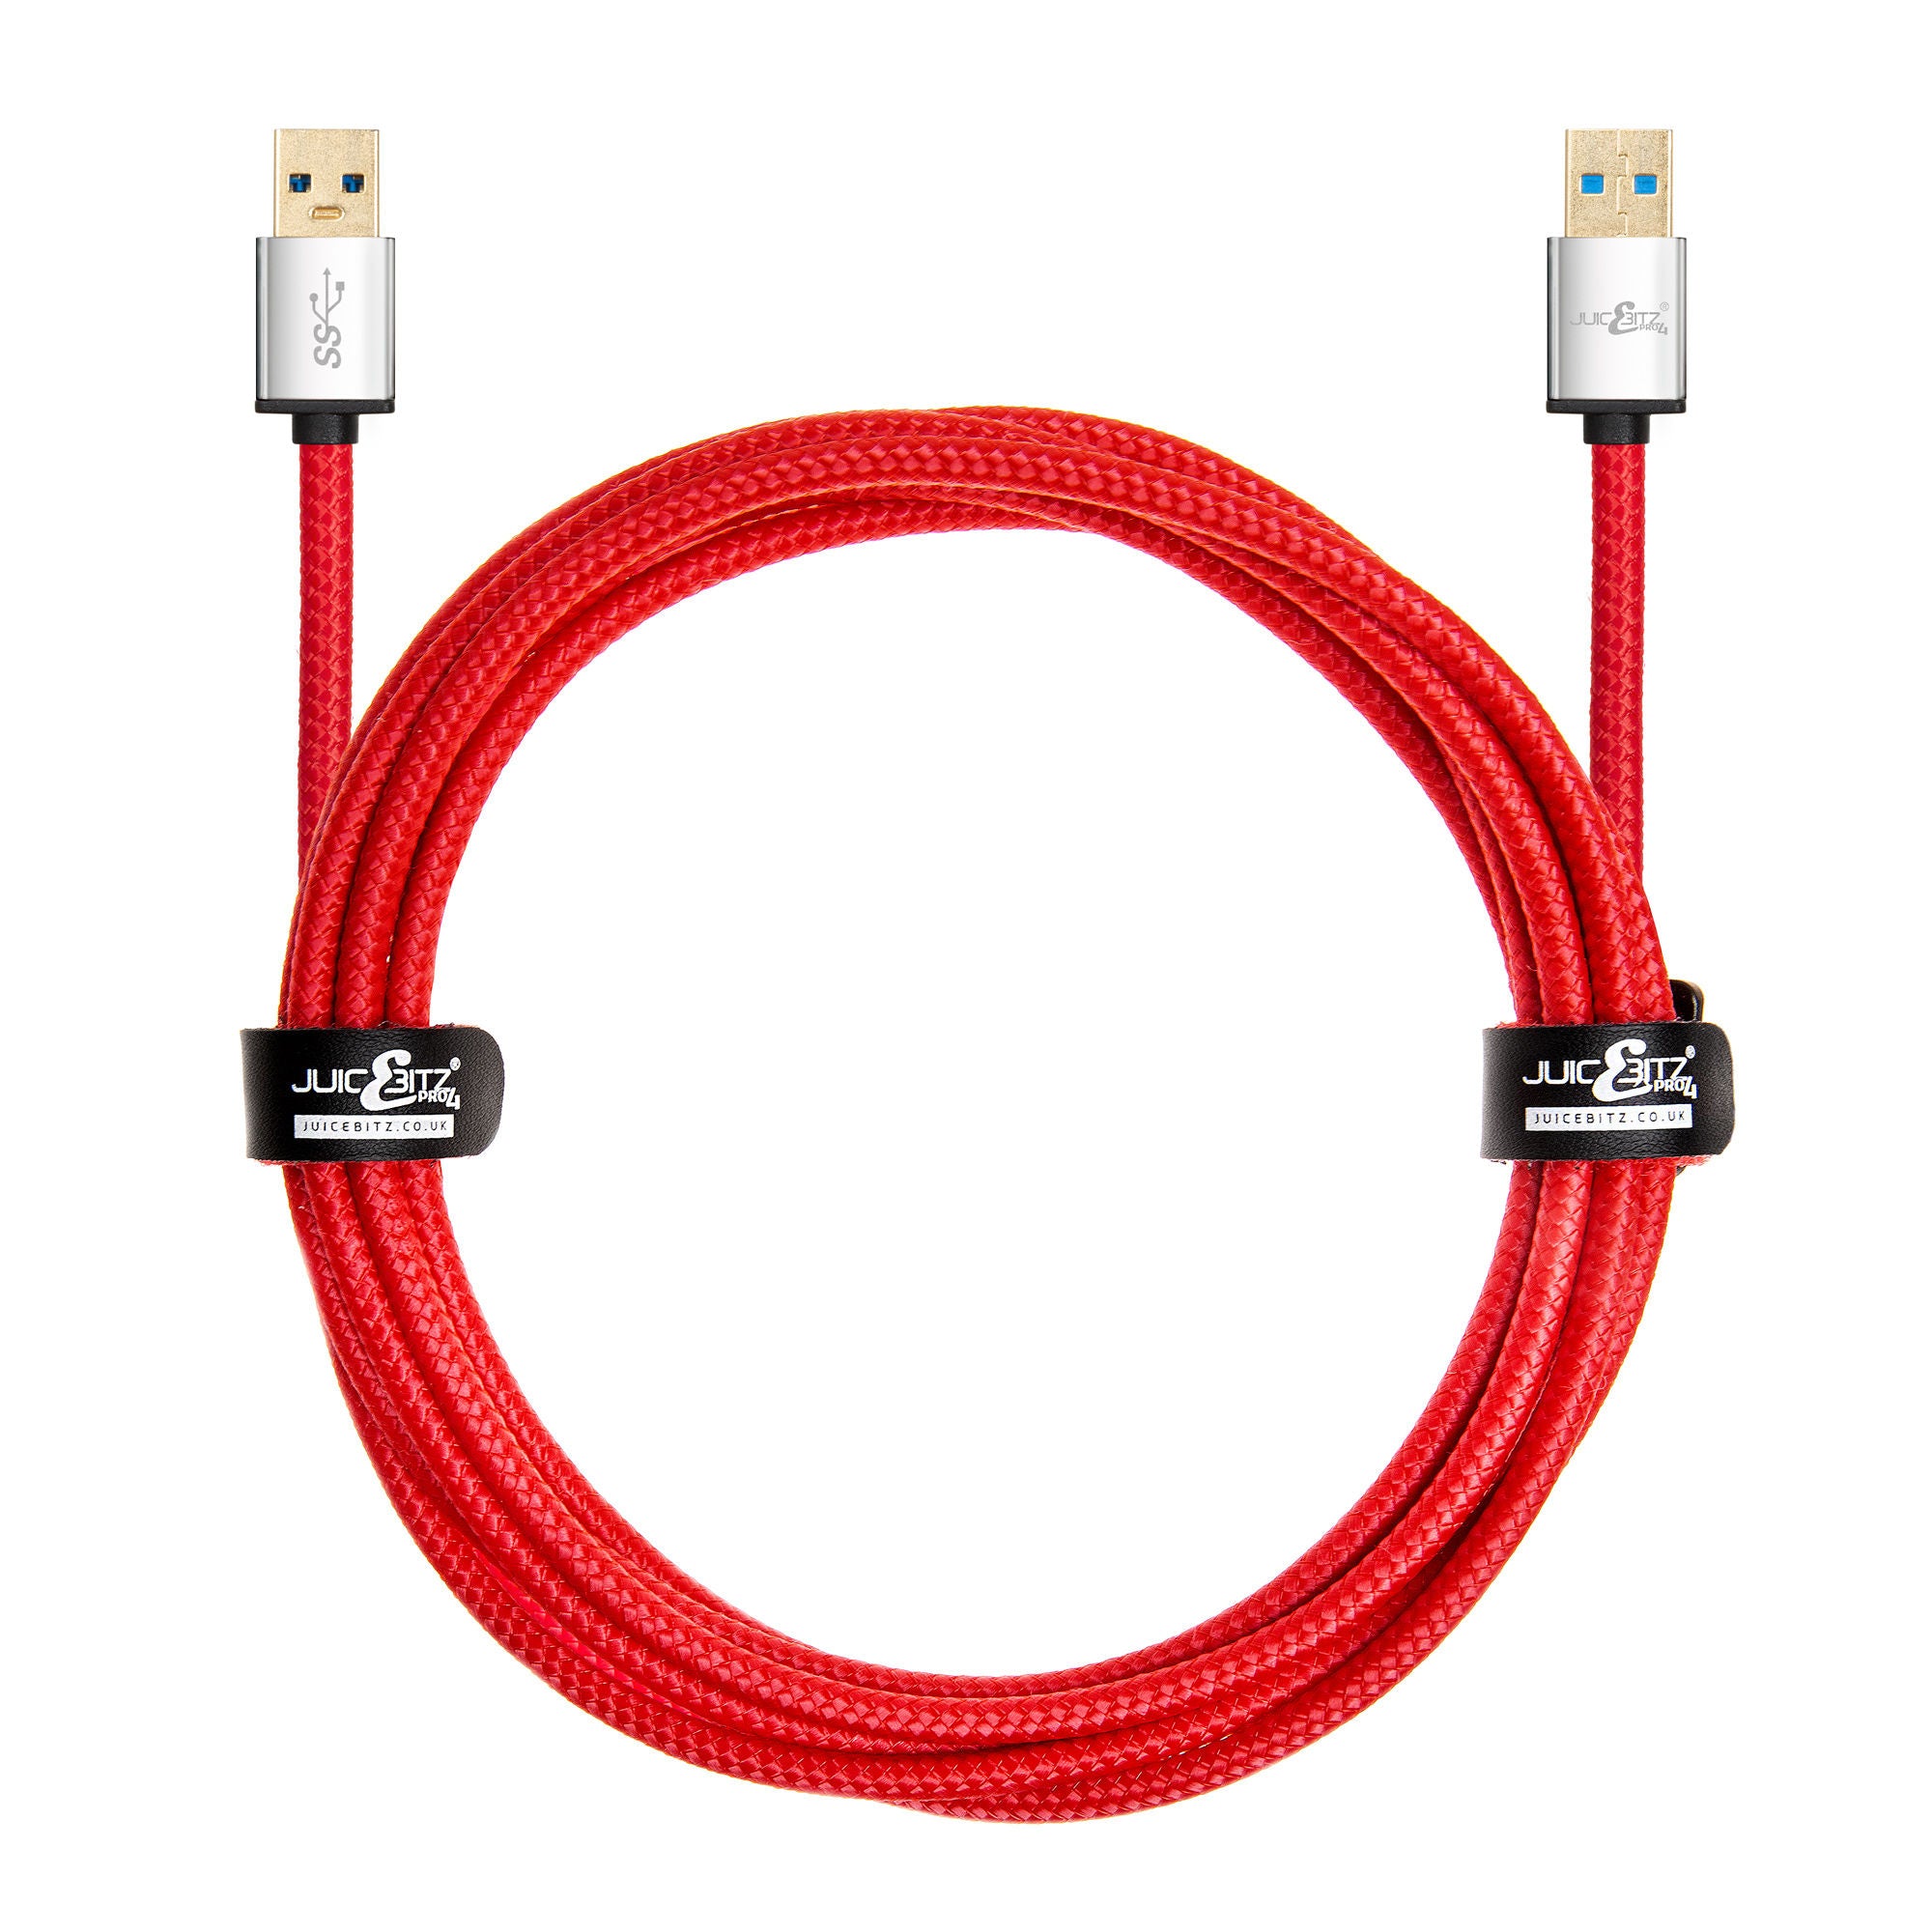 PRO Series Braided Superspeed Male to Male USB 3.0 Data Transfer Cable - Red